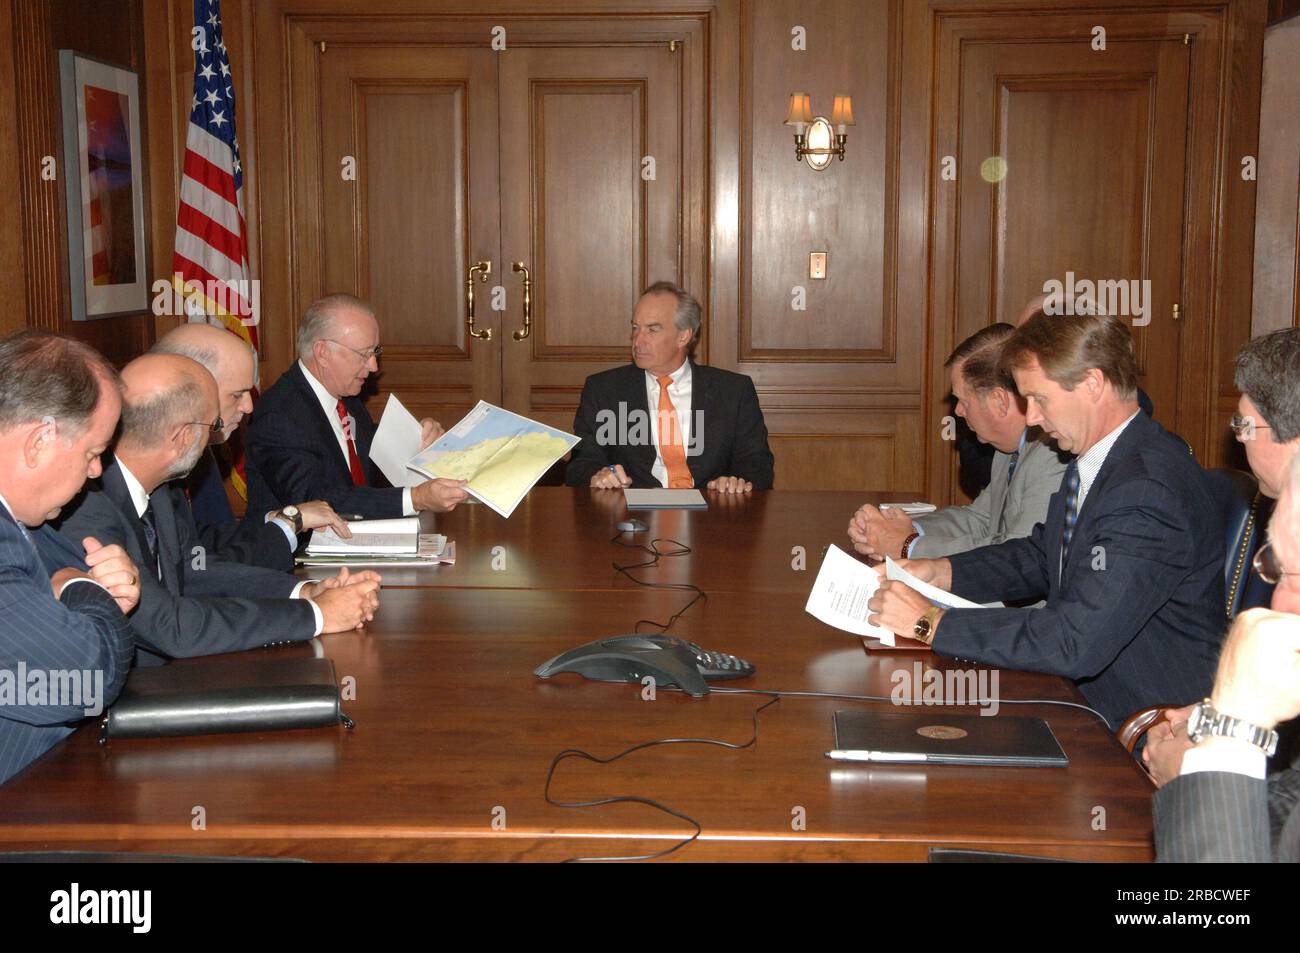 Secretary Dirk Kempthorne meeting at Main Interior with delegation led by California Congressman Howard 'Buck' McKeon, discussing issues related to plans for sand and gravel mine in Soledad Canyon, Los Angeles County Stock Photo